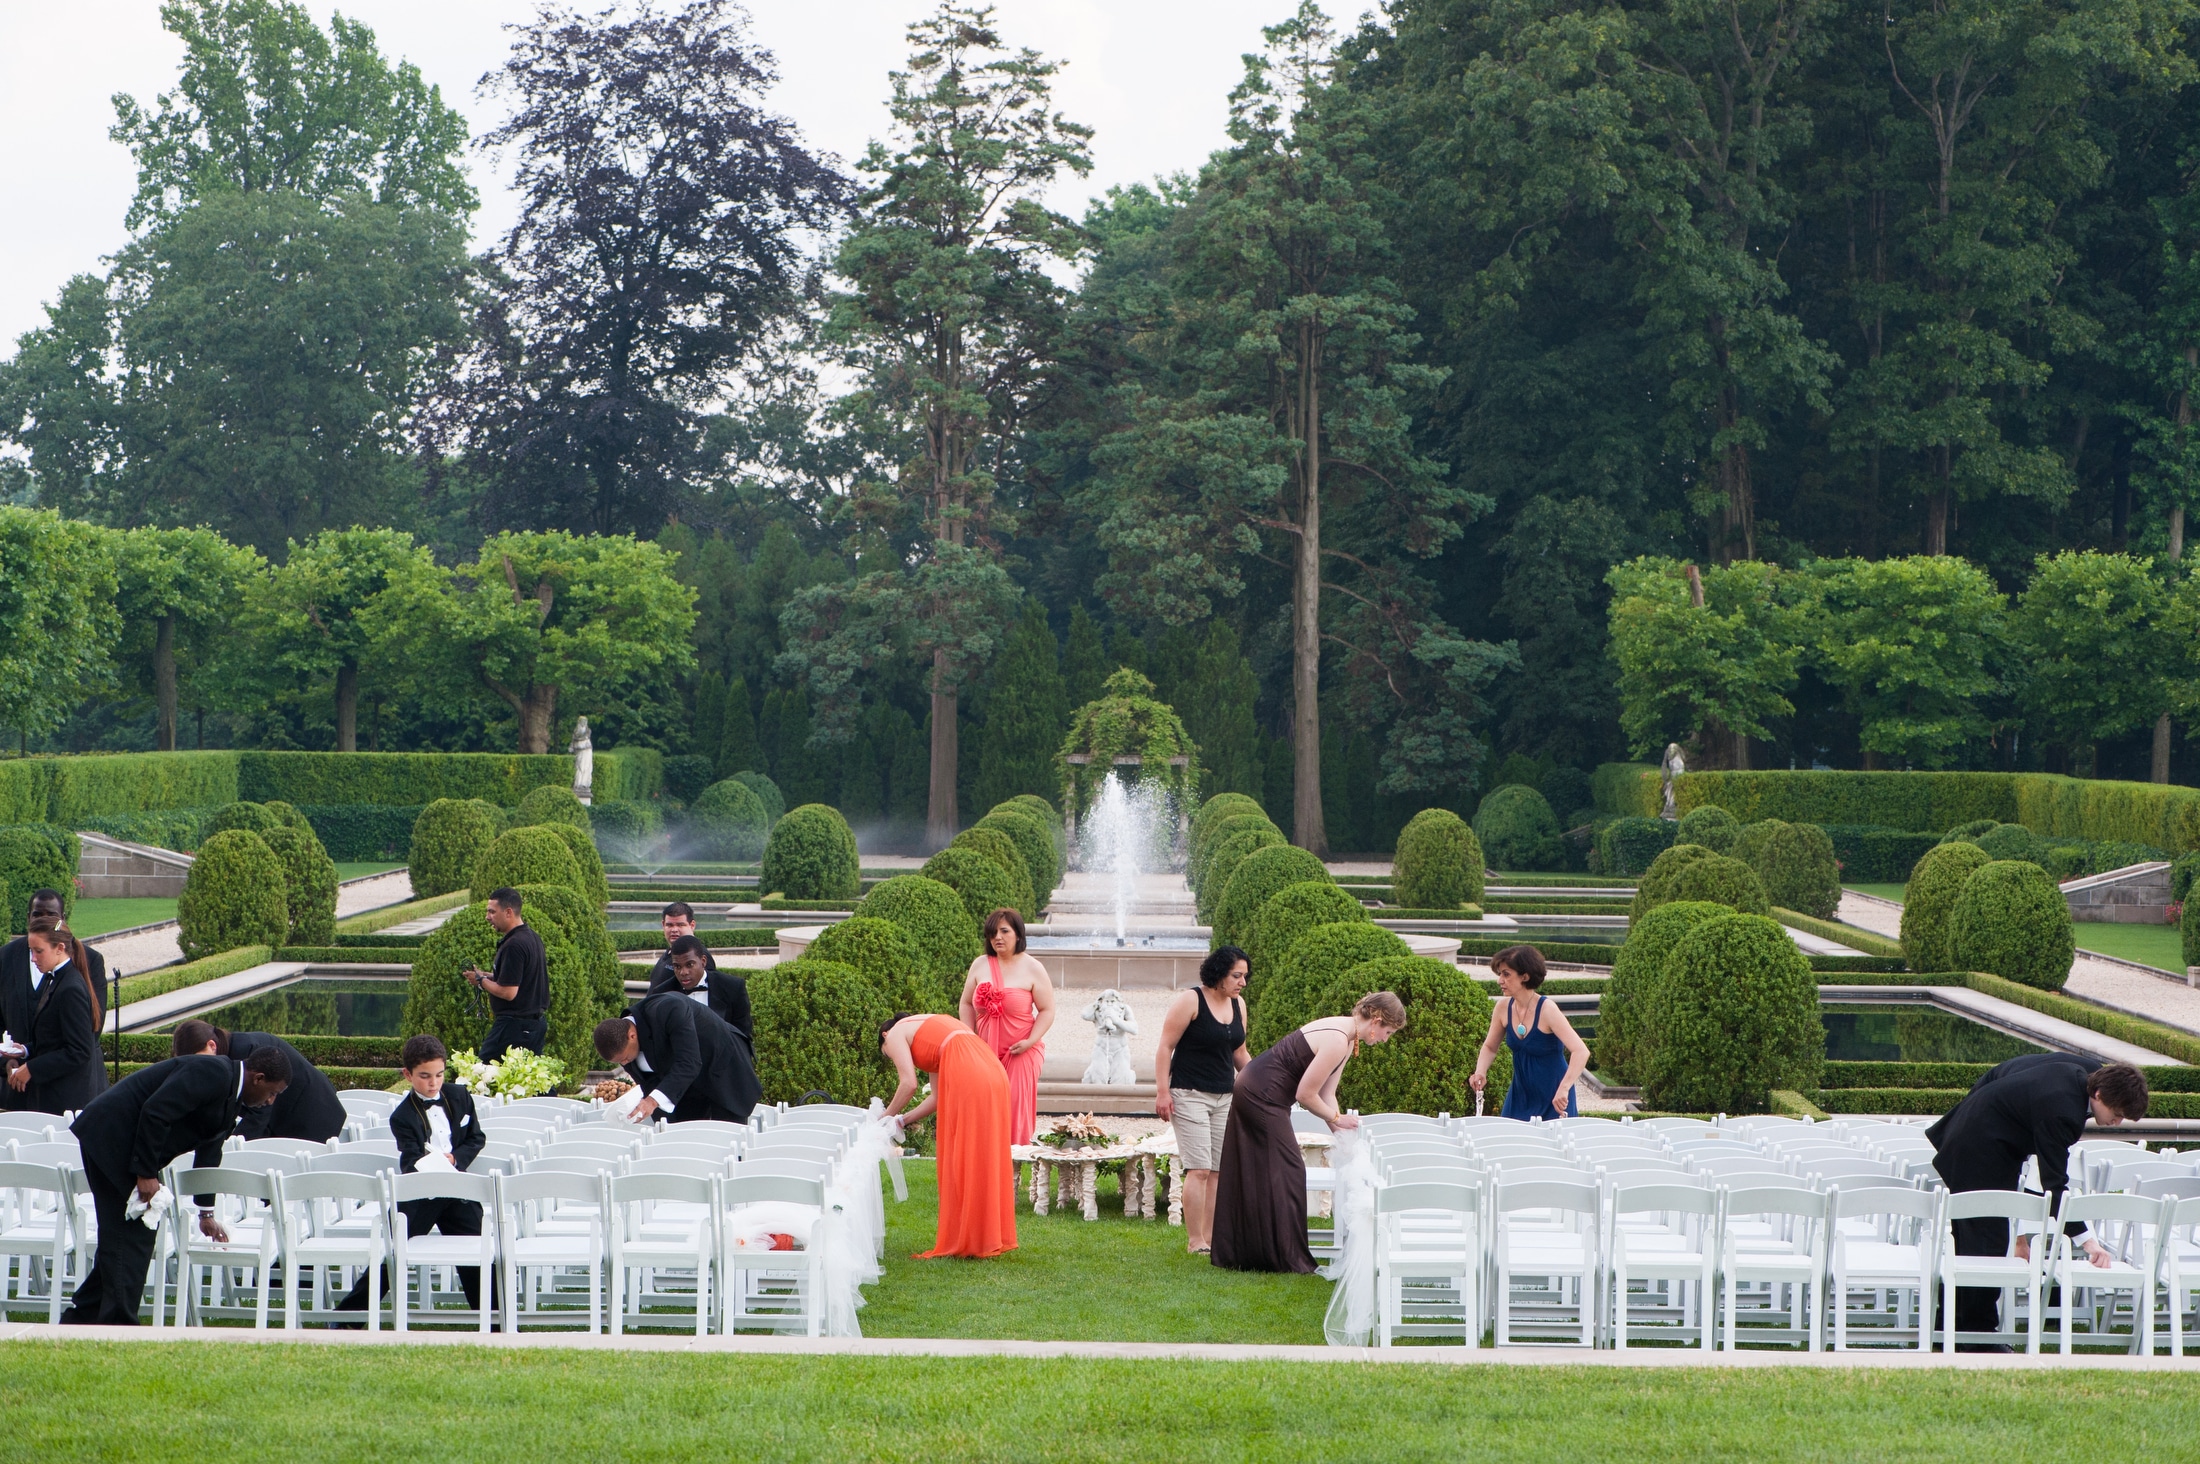 Wedding guests wearing bright gowns and tuxedos dry white folding chairs as they prepare for an outdoor ceremony after a rain storm.